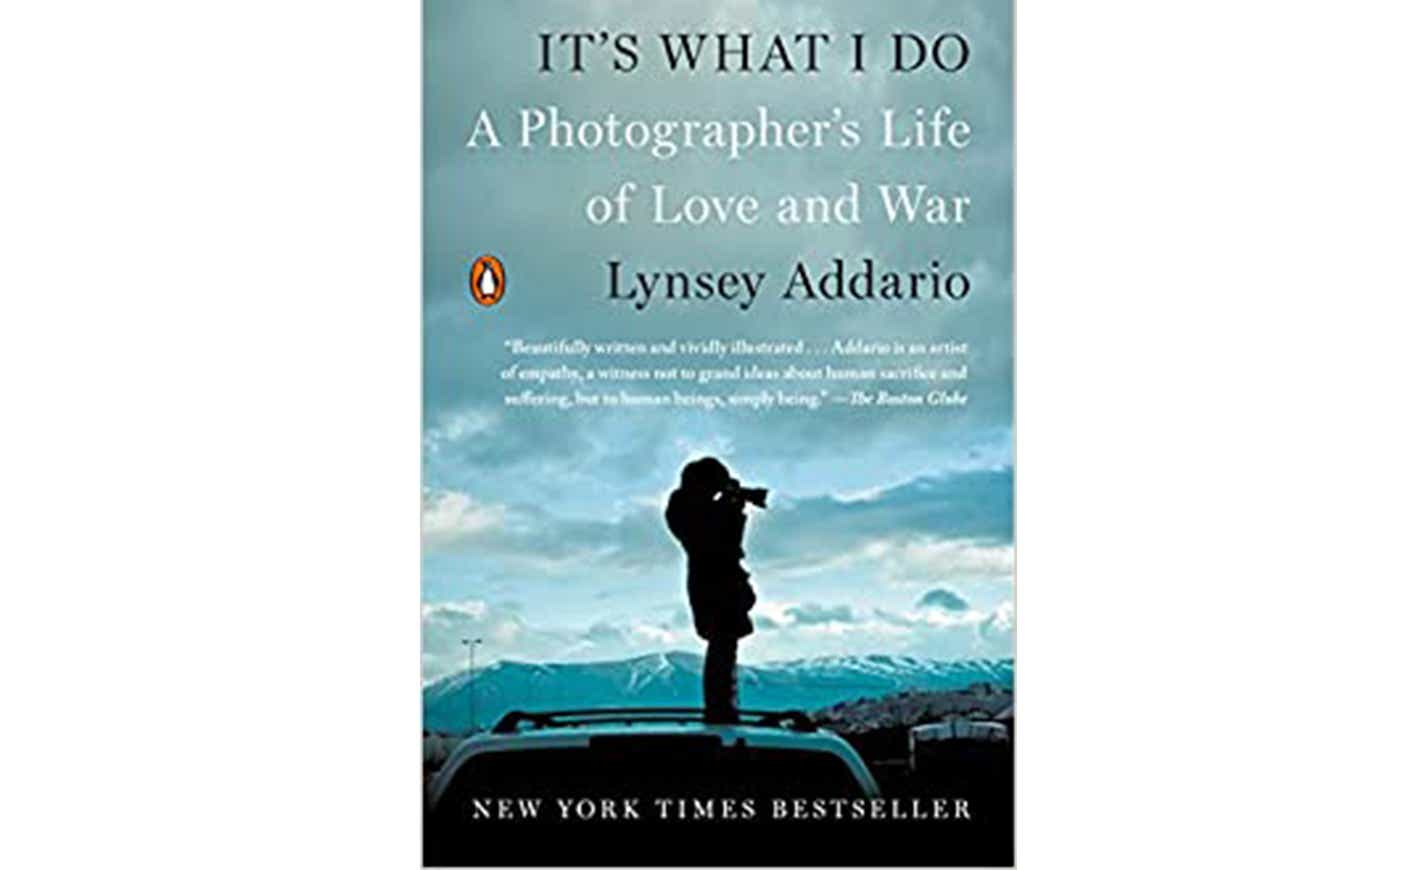 it's what I do by Lynsey Addario